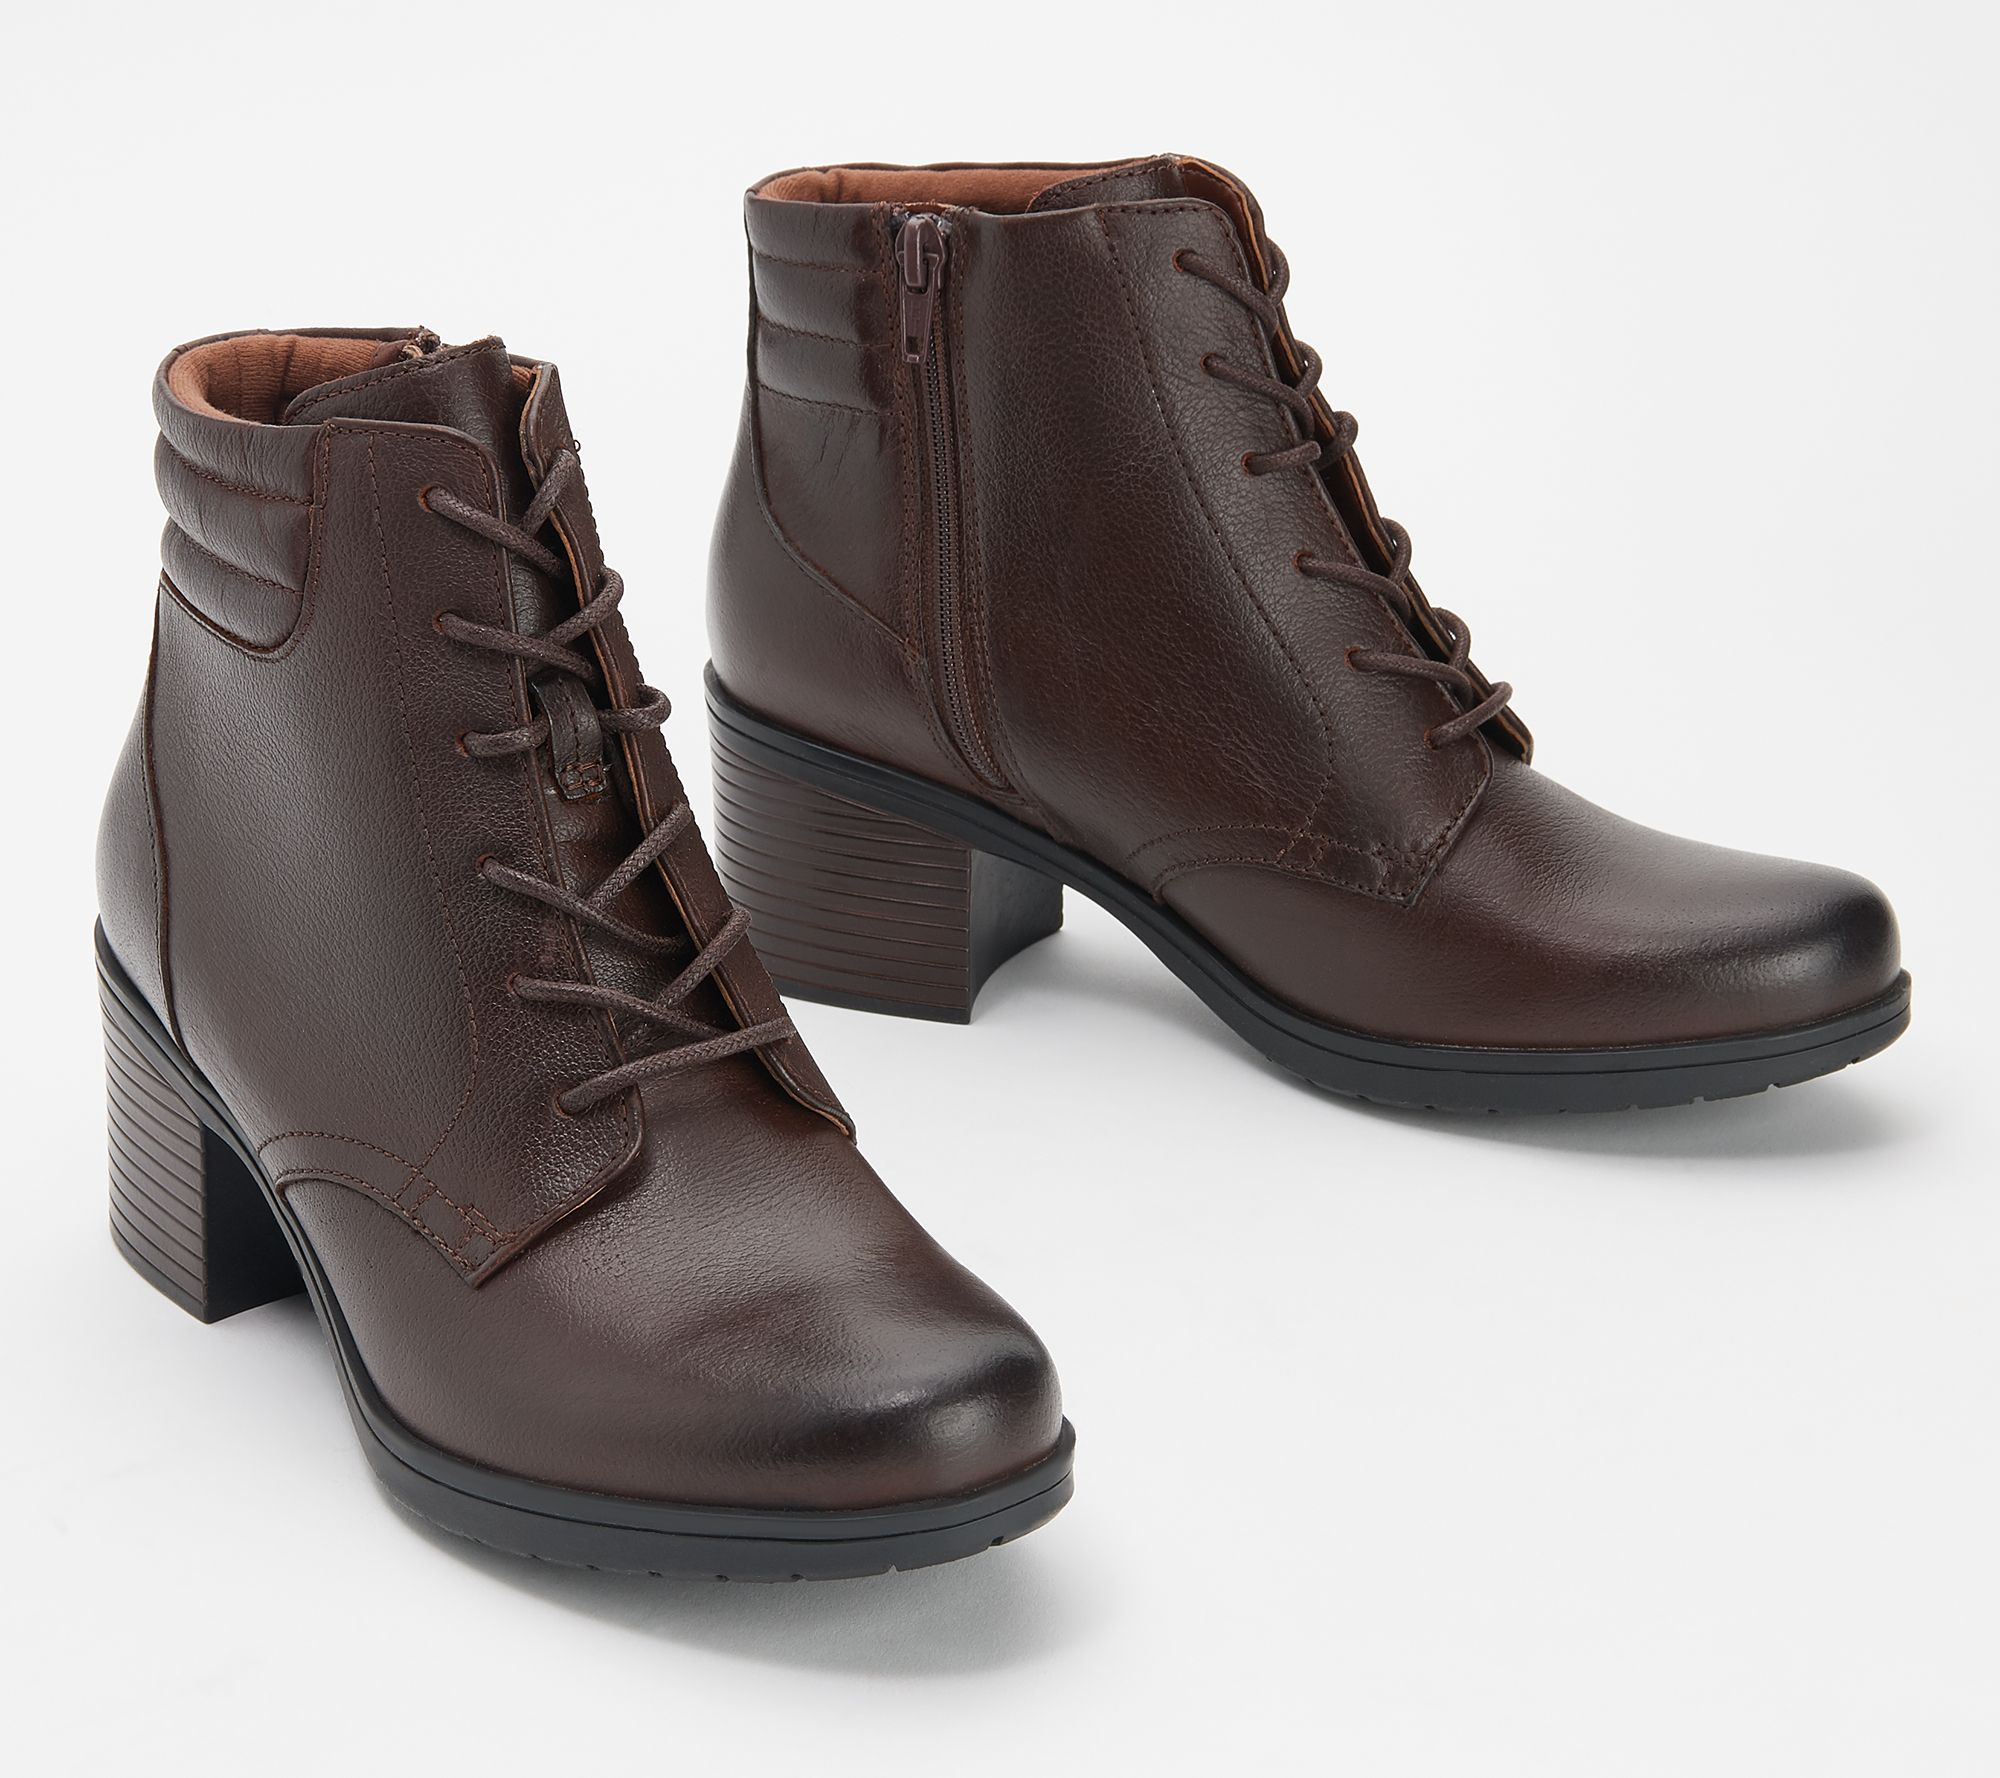 clarks lace up boots low heel